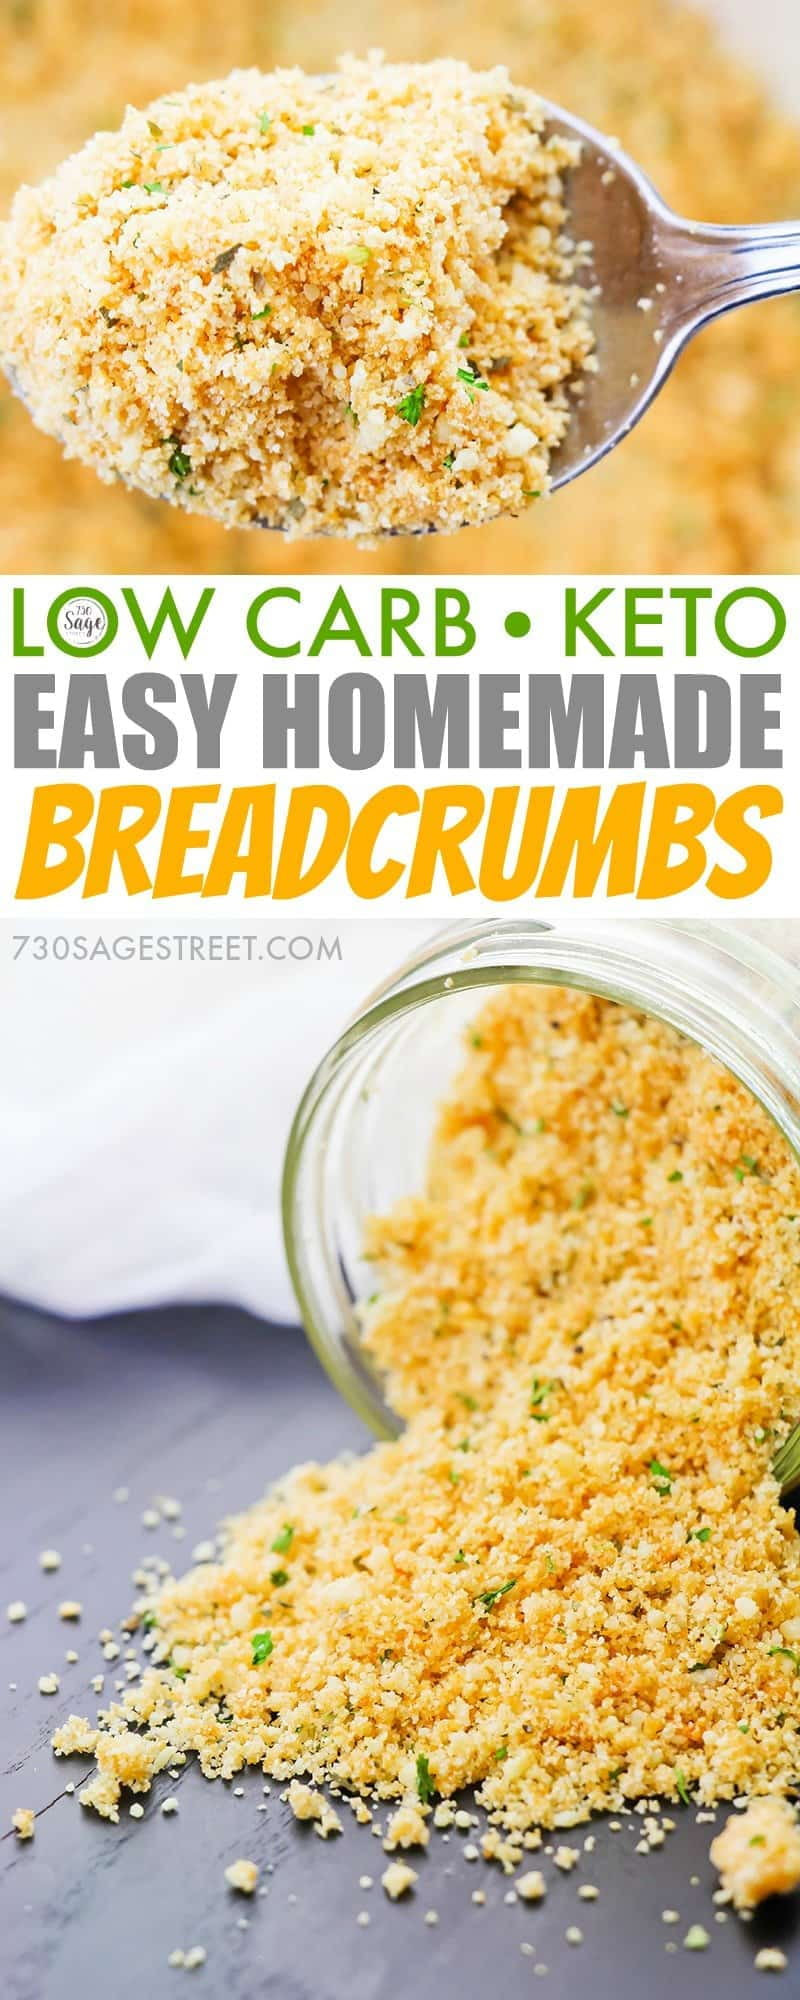 Low Carb Bread Replacement
 low carb substitute for breadcrumbs